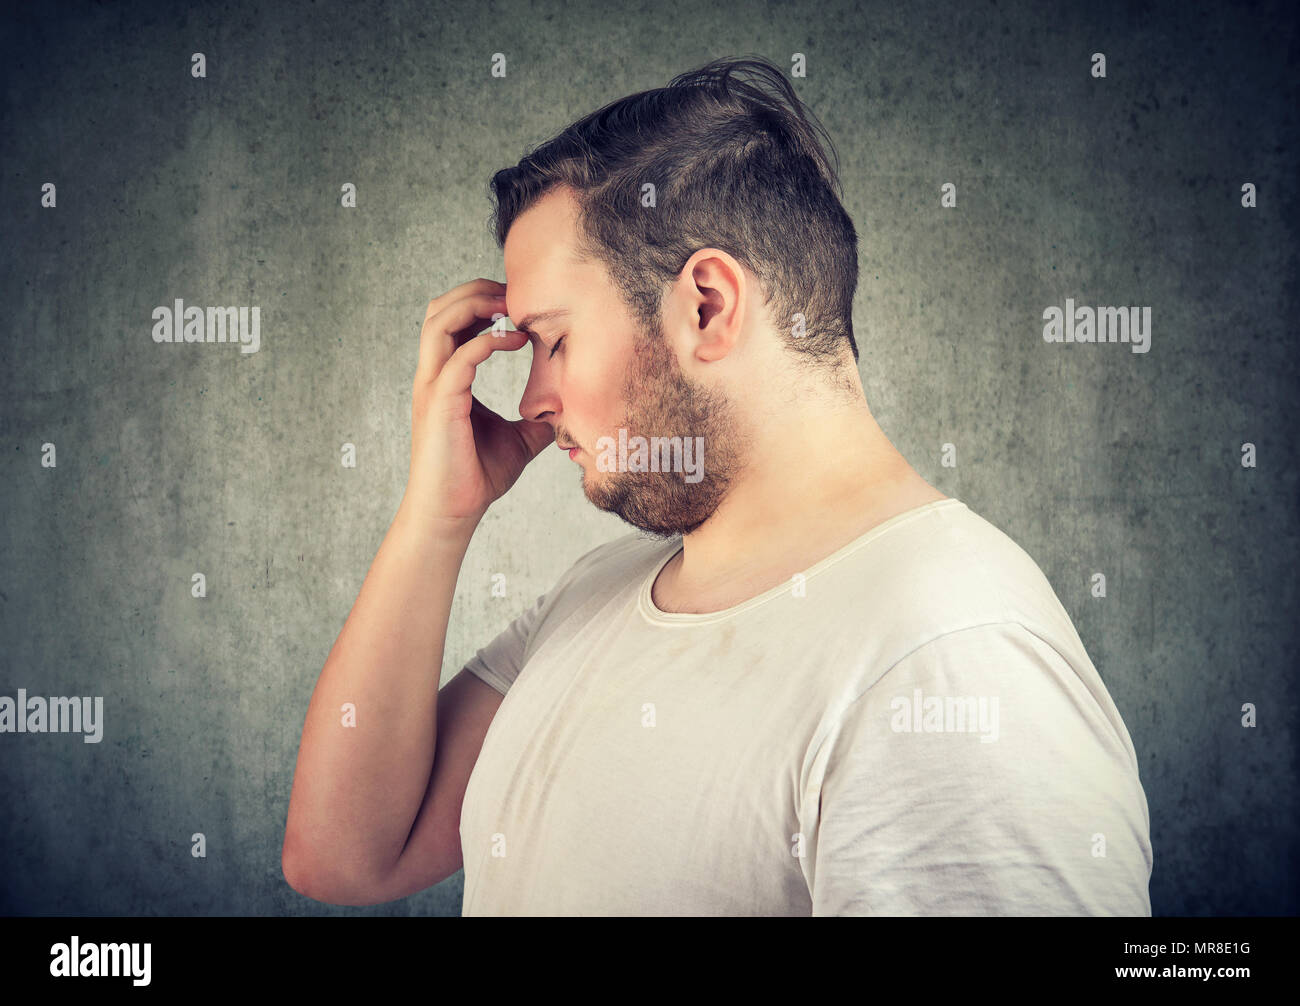 Side view of young overweight man thinking on solution while rubbing forehead. Stock Photo